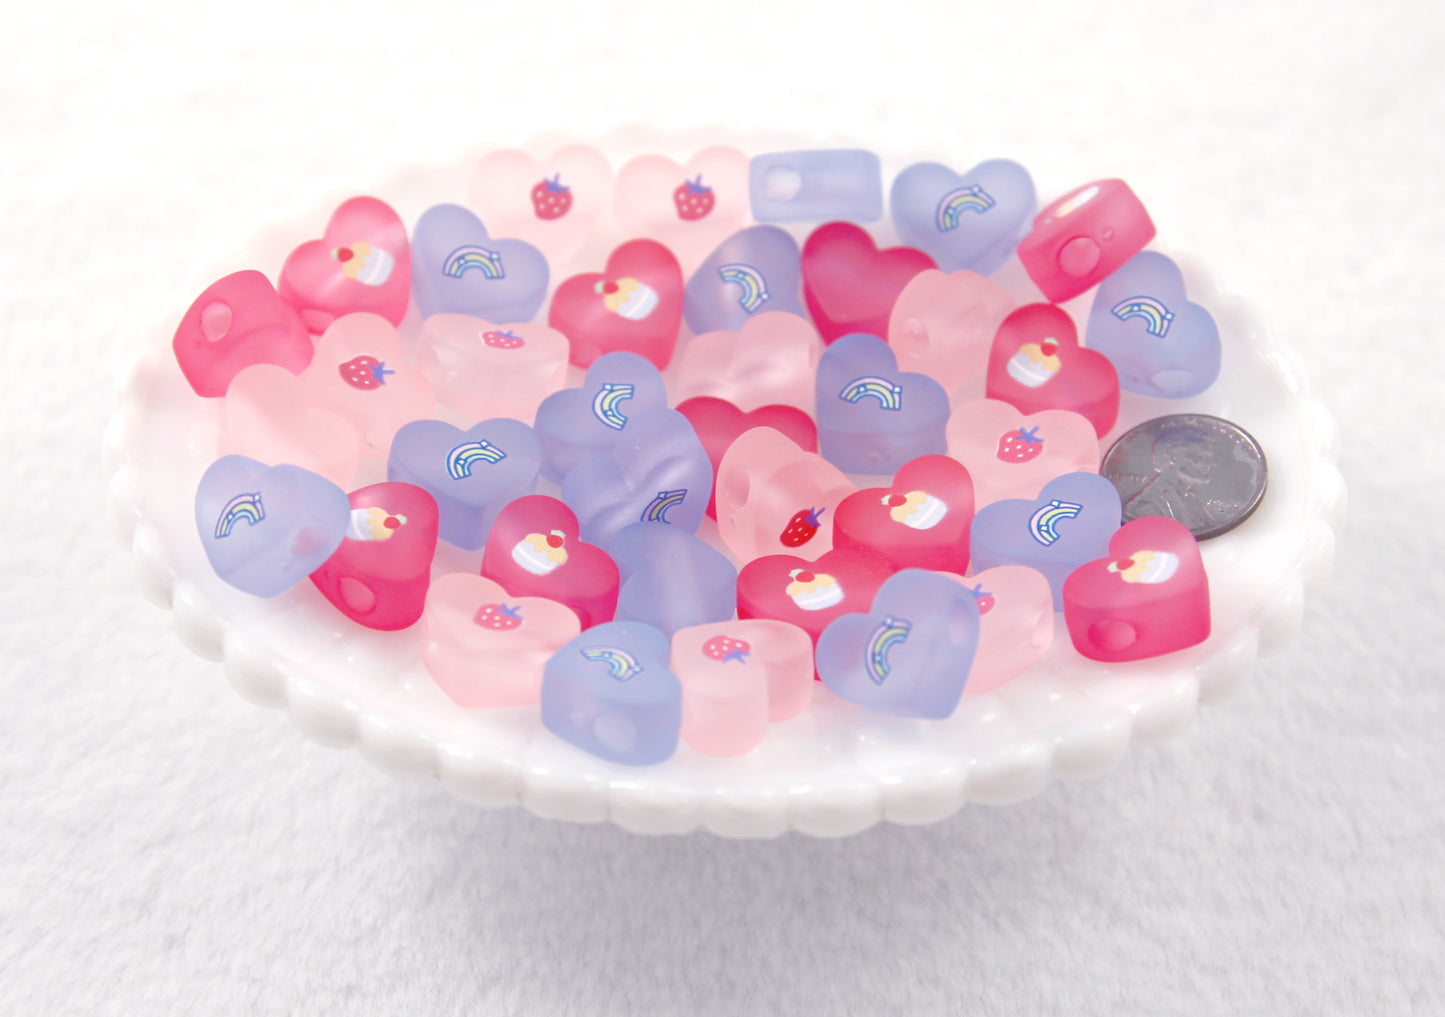 Pastel Heart Beads - 22mm Frosted Pastel Beads with Cute Printed Design - Strawberry, Cupcake, Rainbow - Acrylic or Resin Beads - 15 pcs set